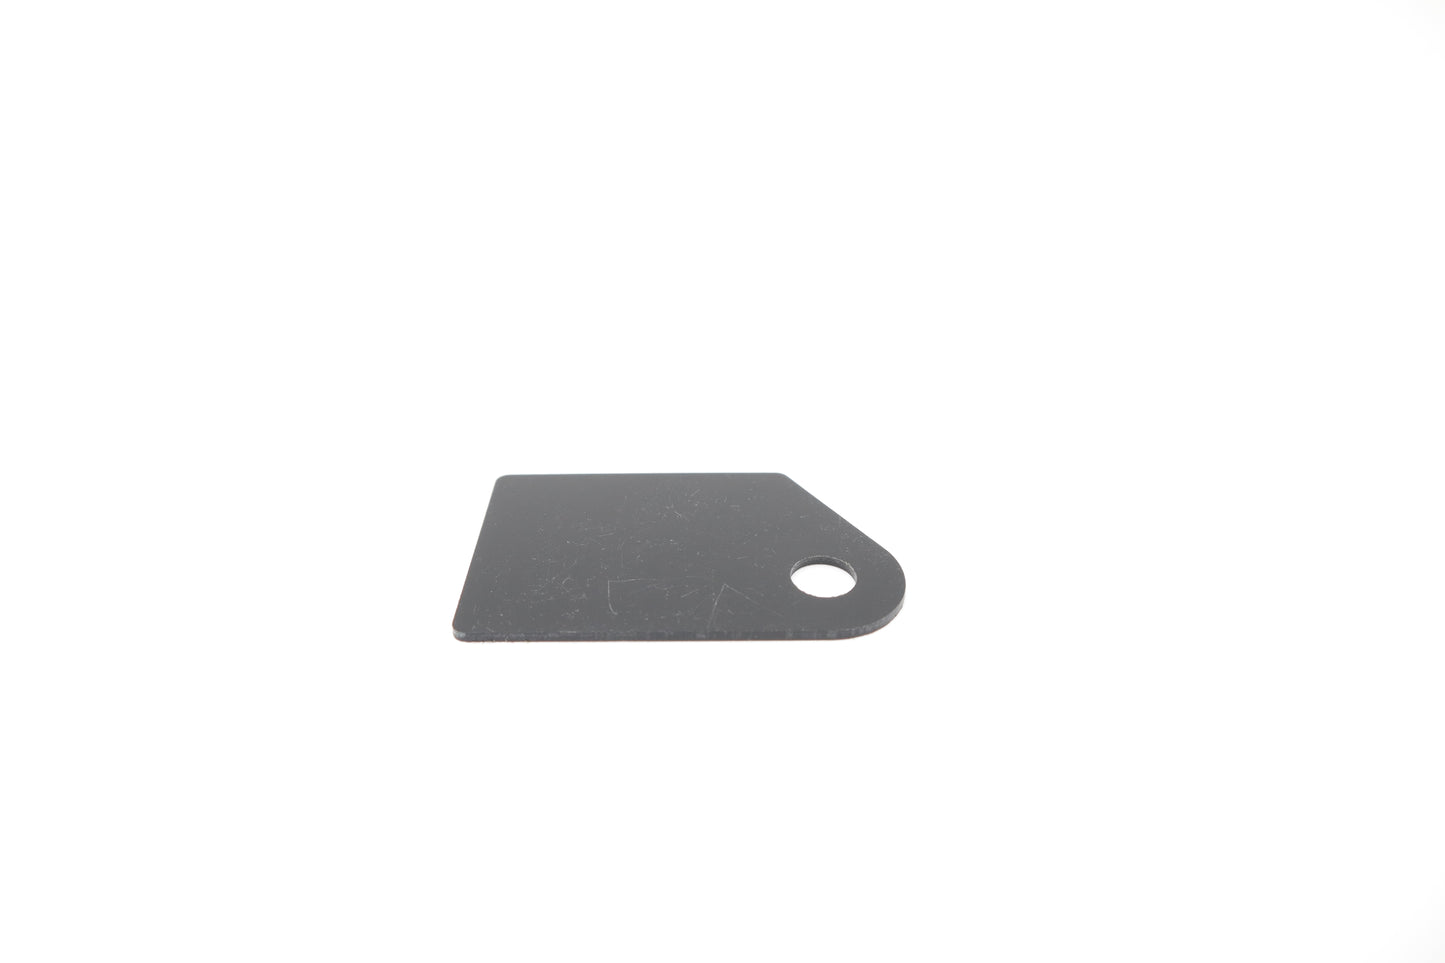 DJI Agras T30 Left and Right Aircraft Arm Friction Pad